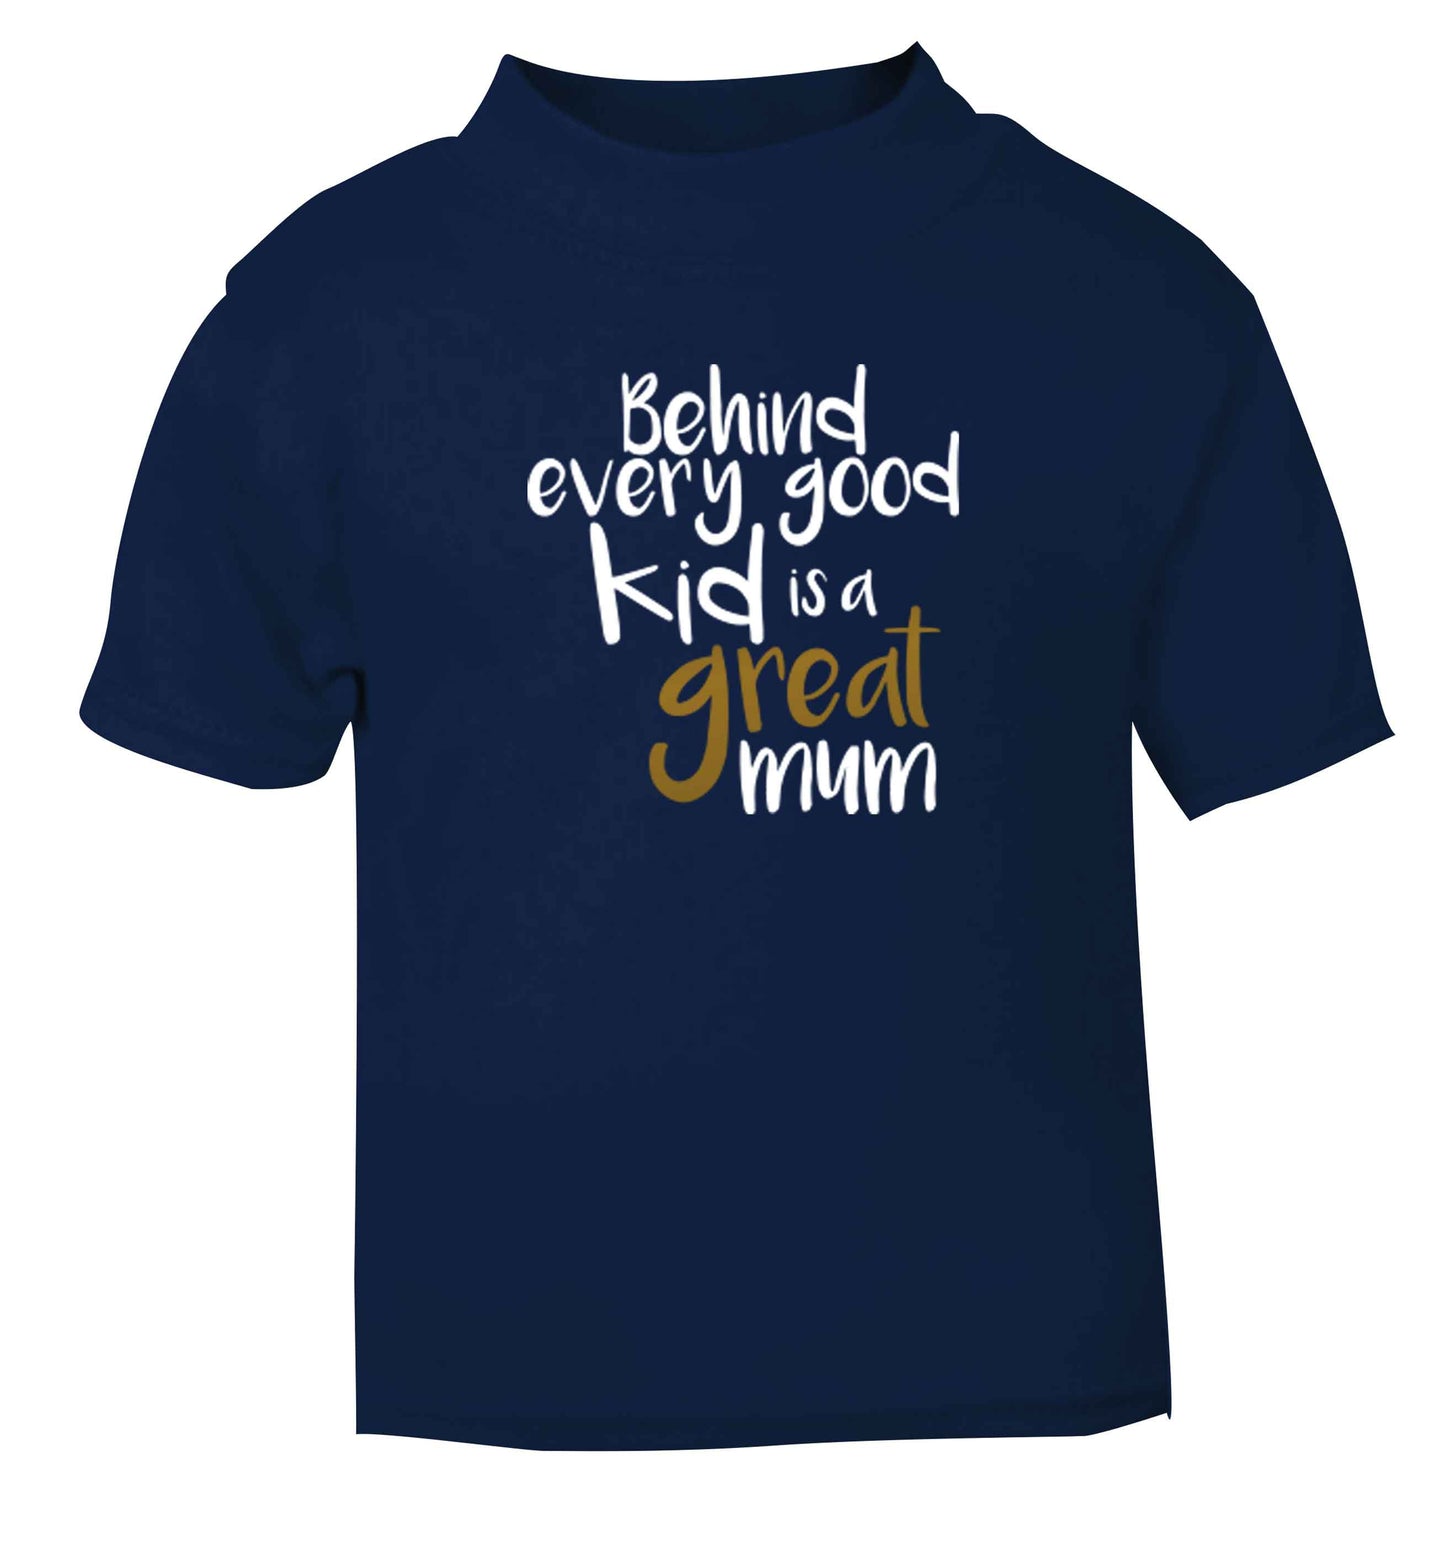 Behind every good kid is a great mum navy baby toddler Tshirt 2 Years